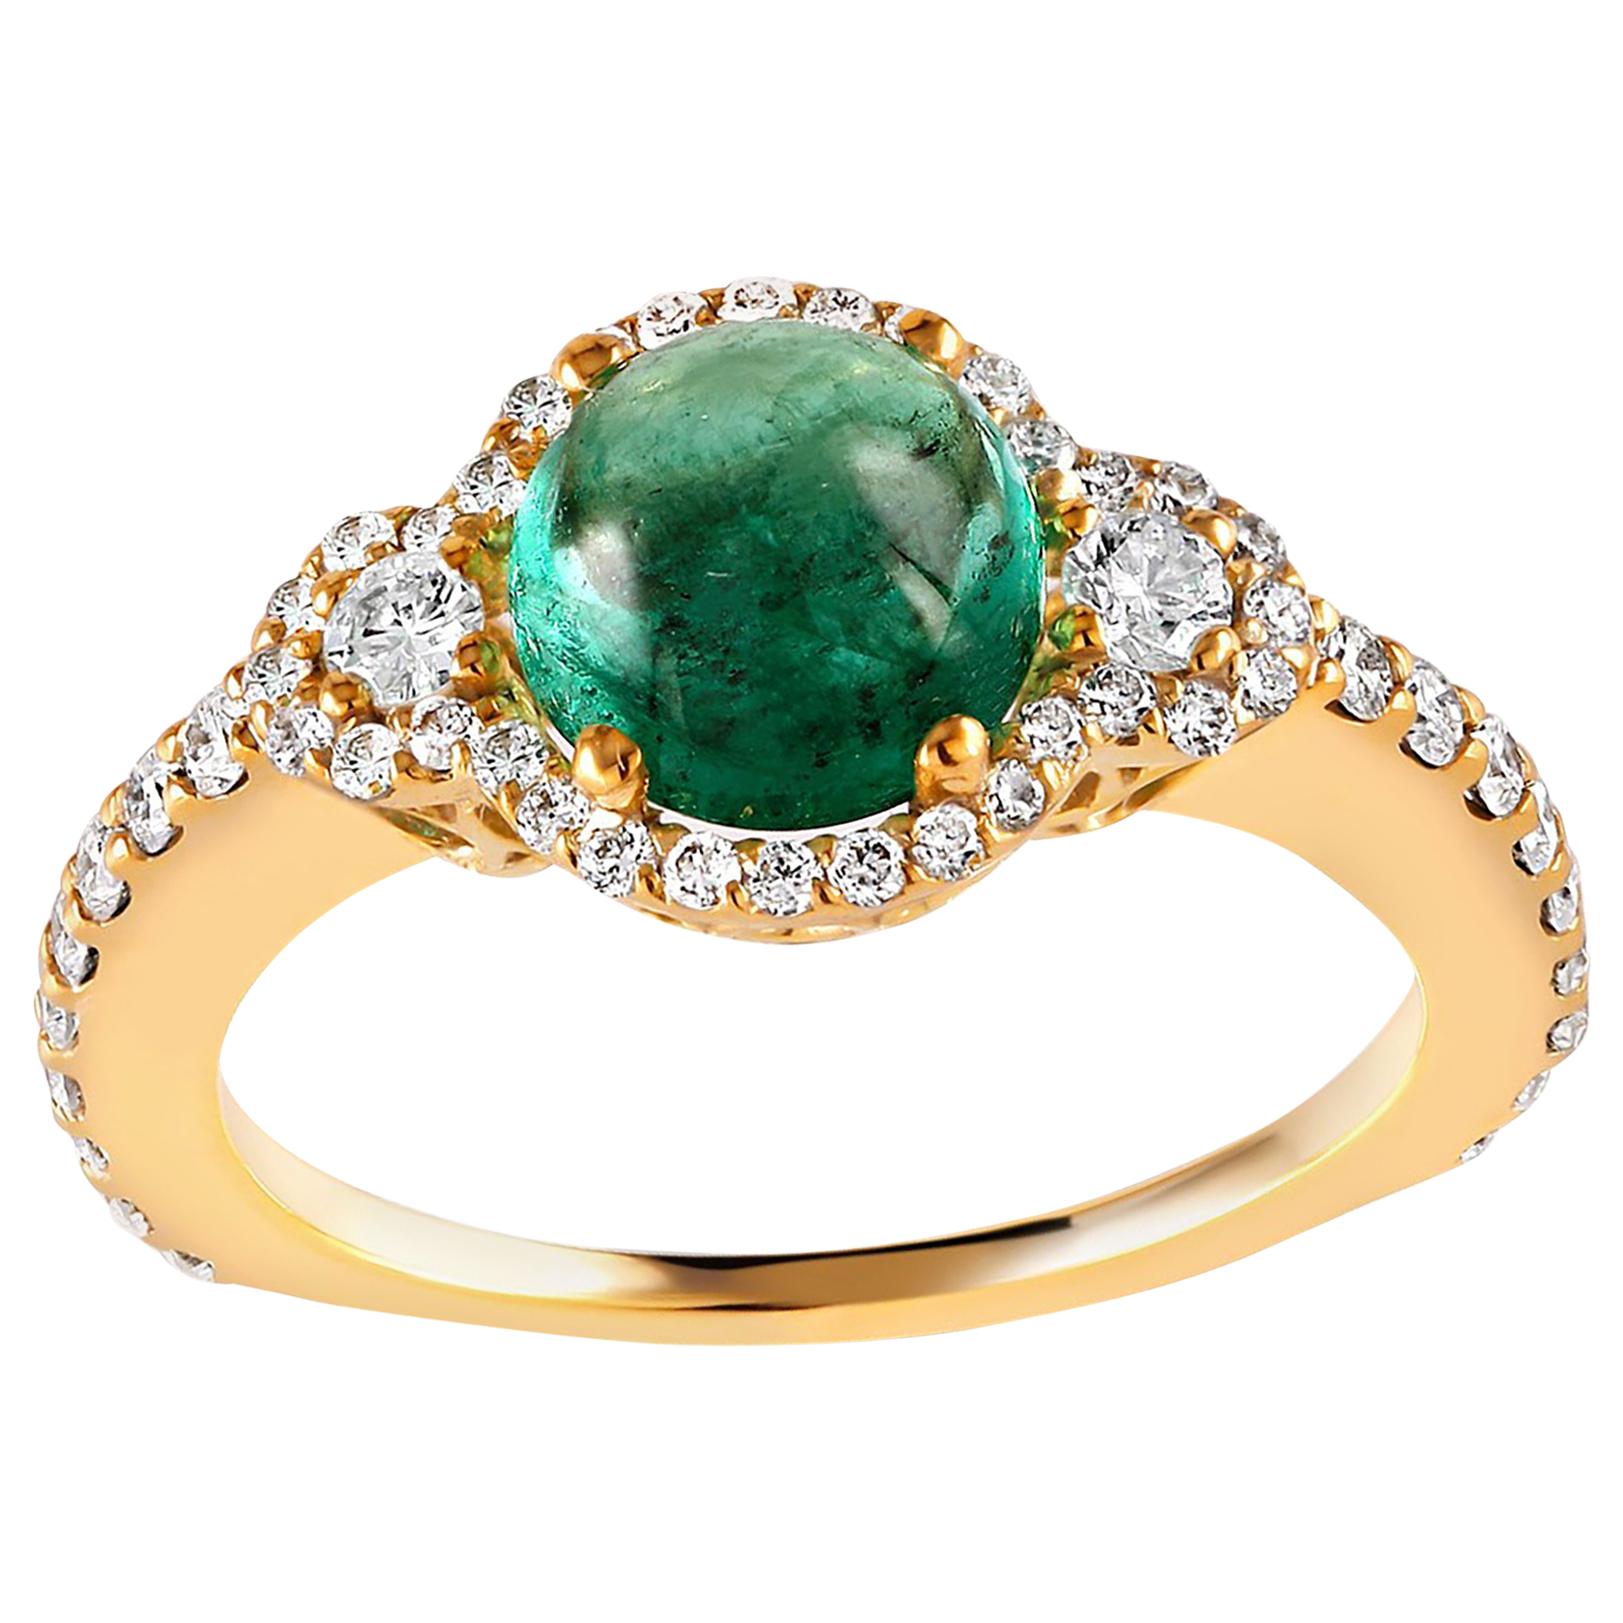 Oval Cut Cabochon Emerald and Diamond Cluster Yellow Gold Ring Weighing 3.60 Carat